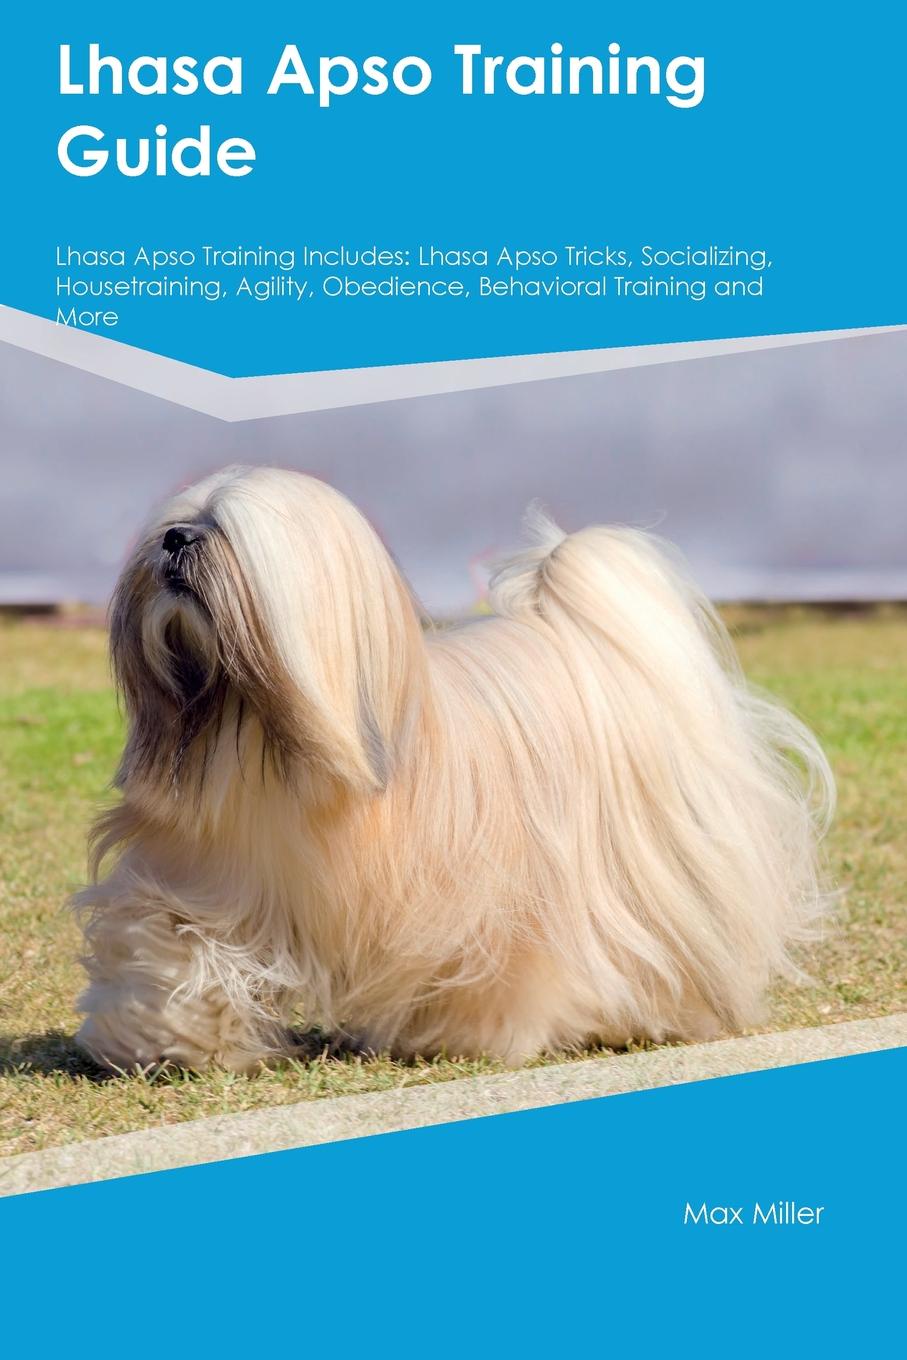 Lhasa Apso Training Guide Lhasa Apso Training Includes. Lhasa Apso Tricks, Socializing, Housetraining, Agility, Obedience, Behavioral Training and More